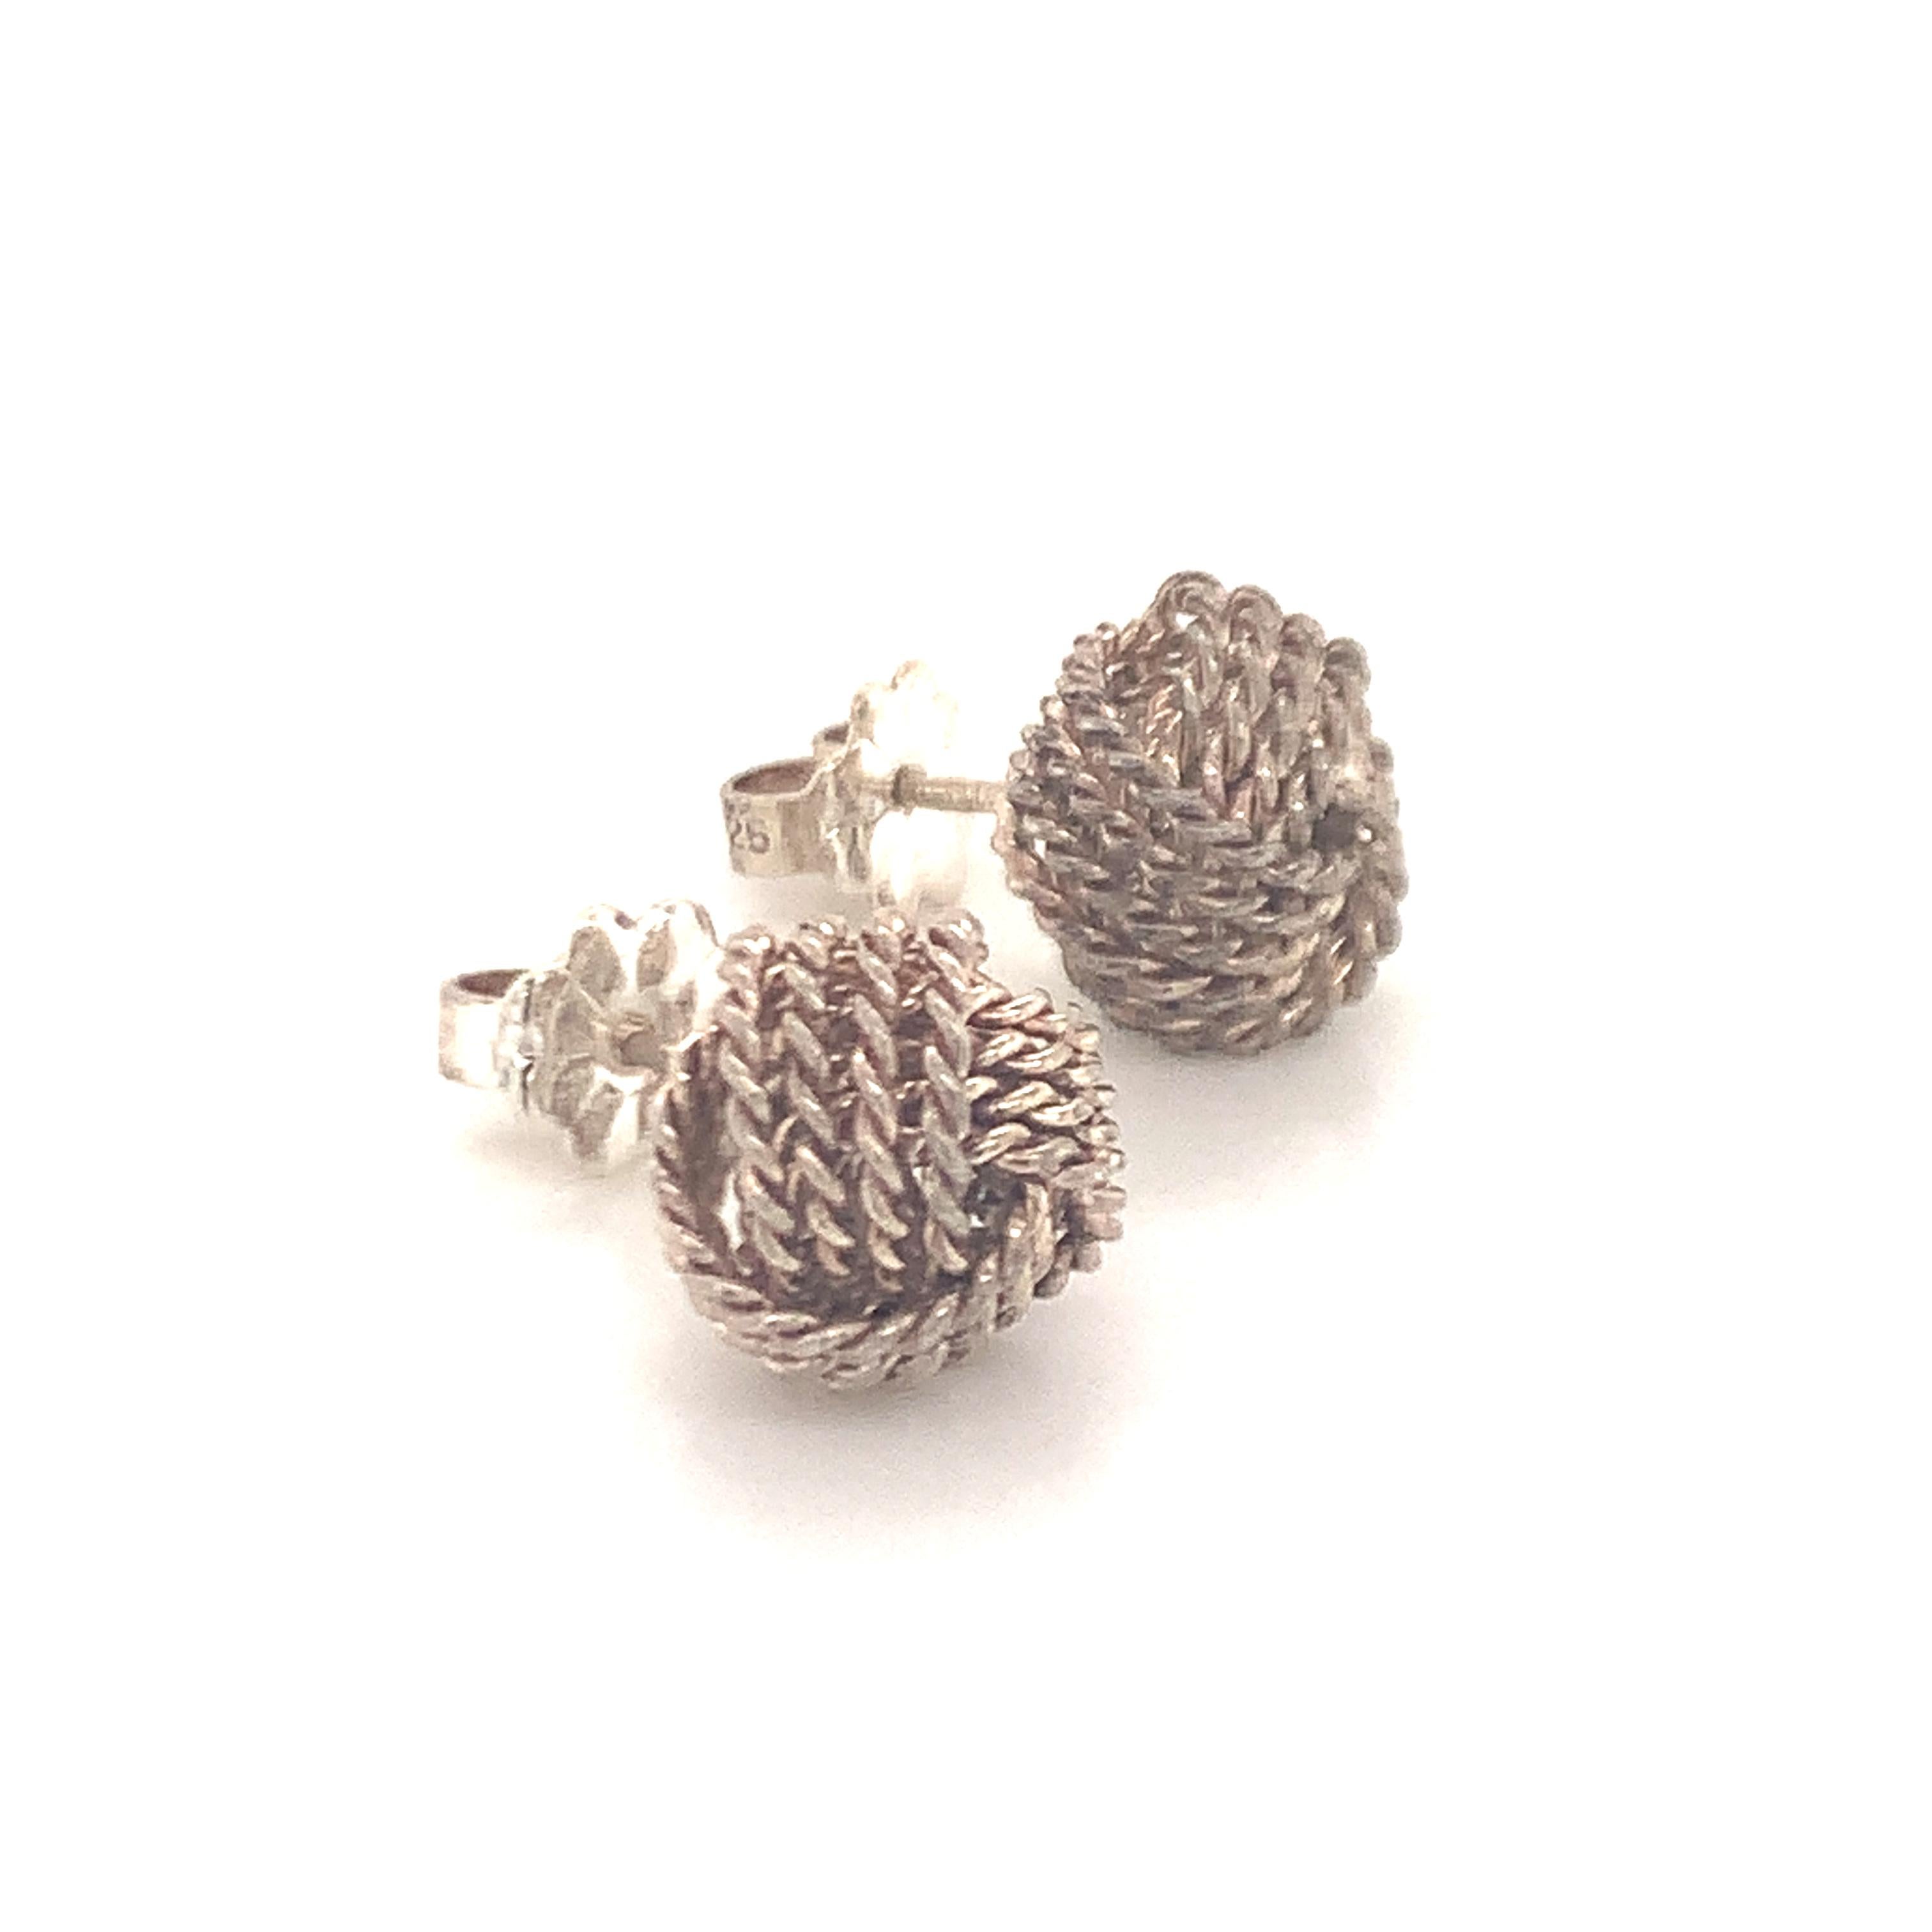 Tiffany & Co Estate Sterling Silver Love Knot Earrings 2.8 Grams TIF85
 
These elegant Authentic Tiffany & Co love knot earrings have a weight of 2.8 Grams.

TRUSTED SELLER SINCE 2002
 
PLEASE SEE OUR HUNDREDS OF POSITIVE FEEDBACKS FROM OUR